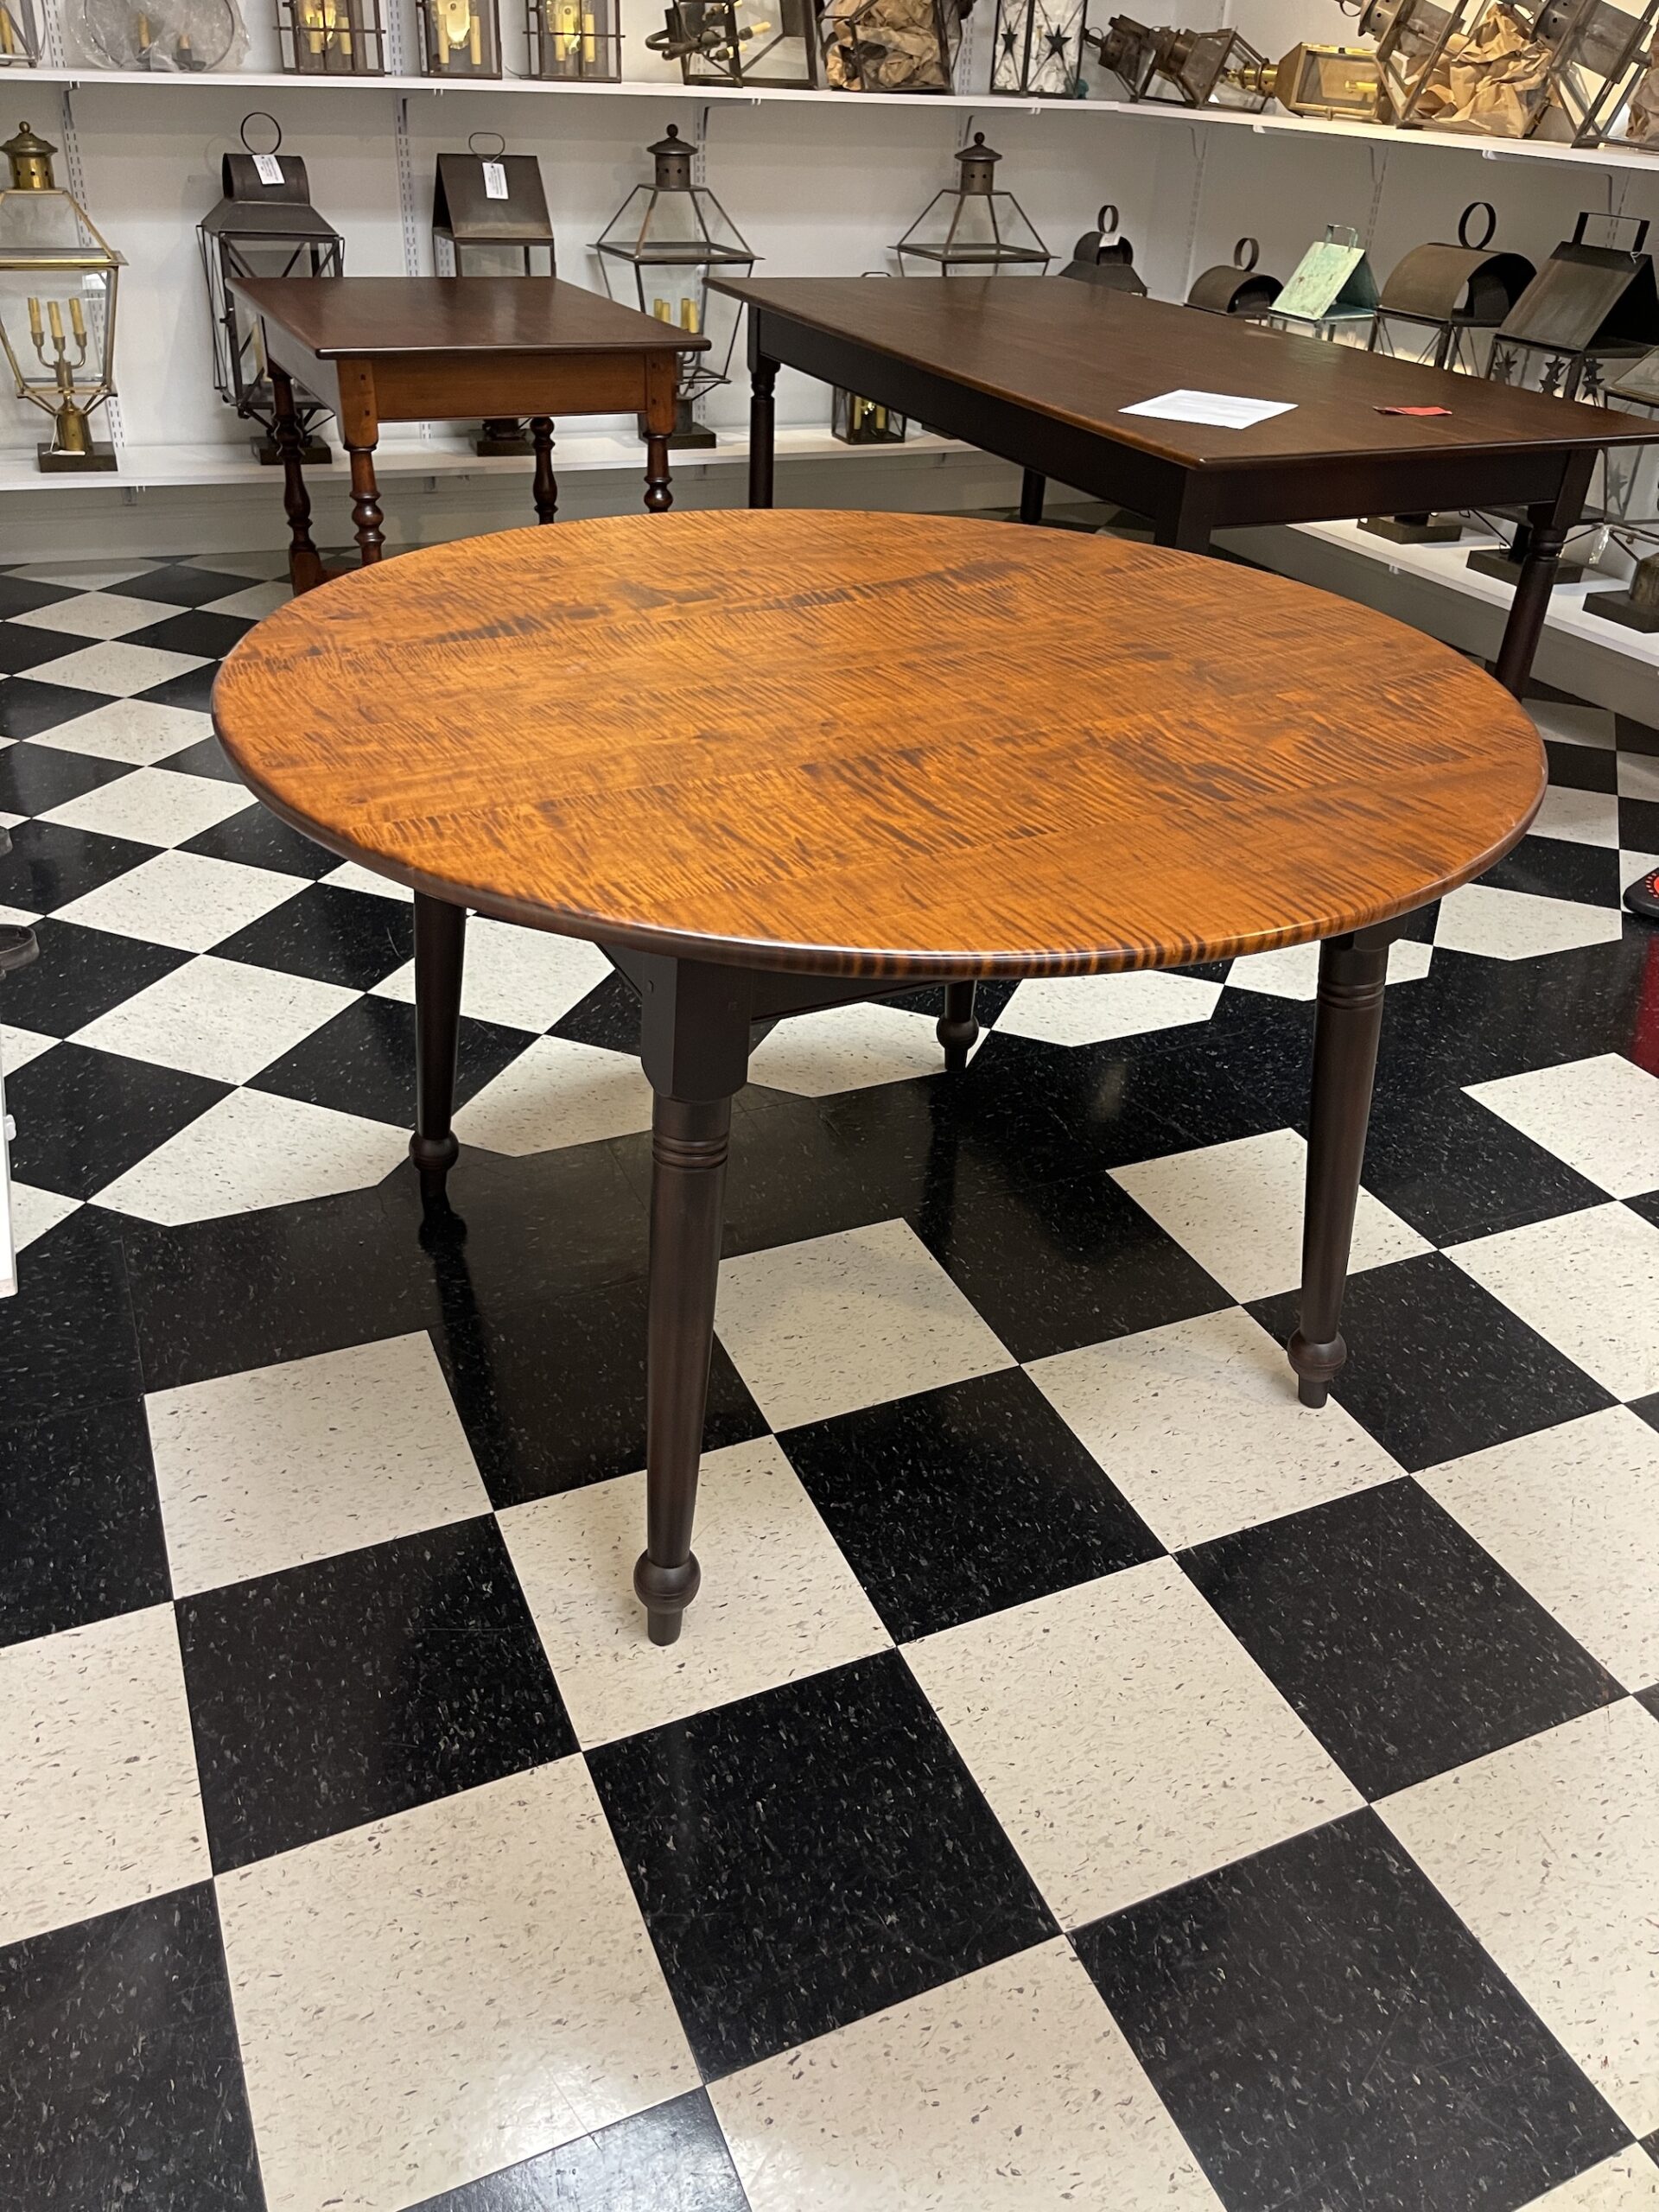 48in Round Country Splay Leg Table - Tiger Maple Top - Painted Base Image